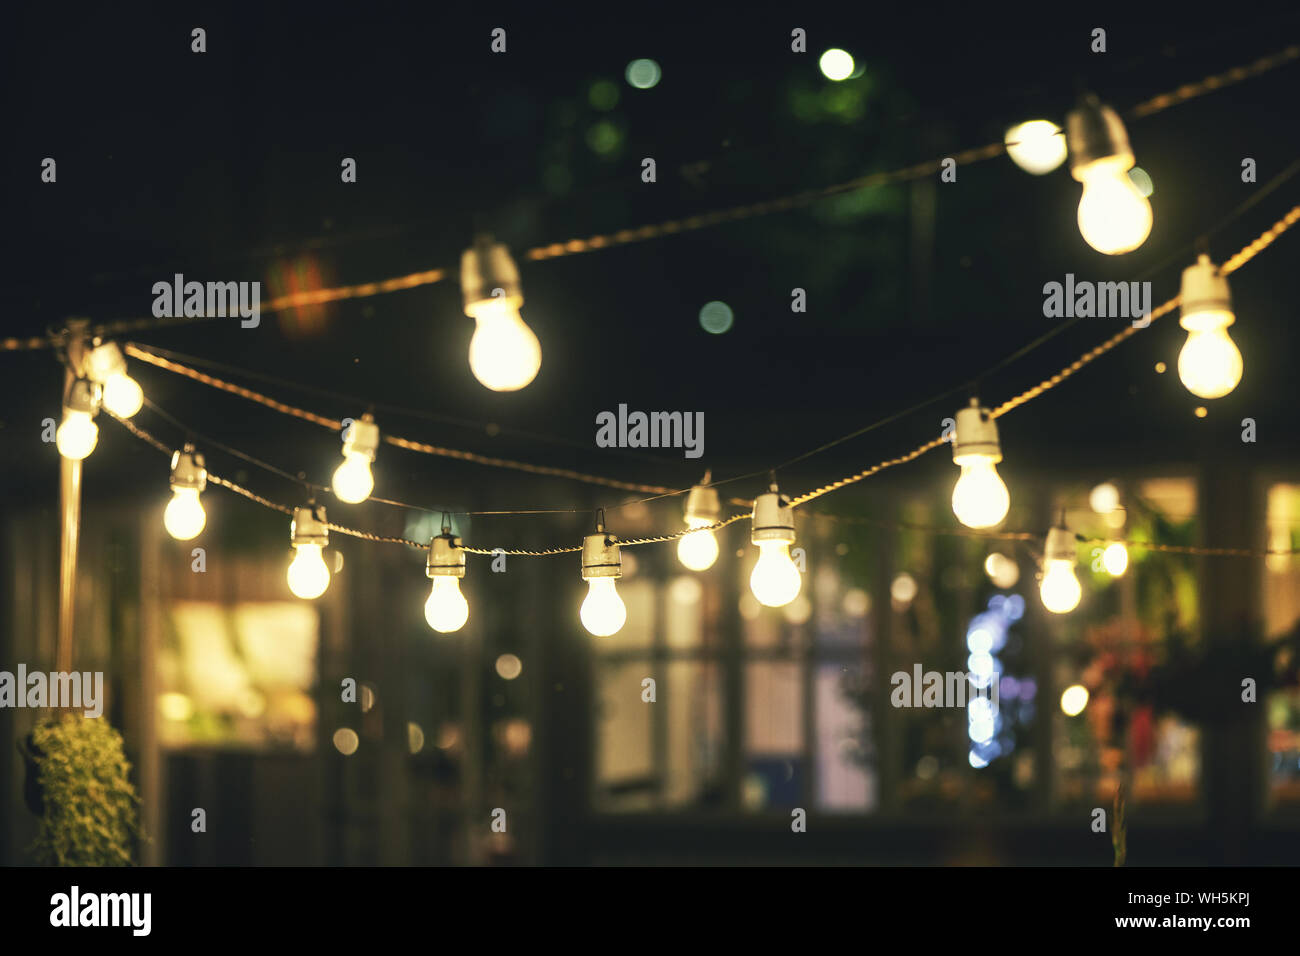 Outdoor party string lights glowing at night Banque D'Images